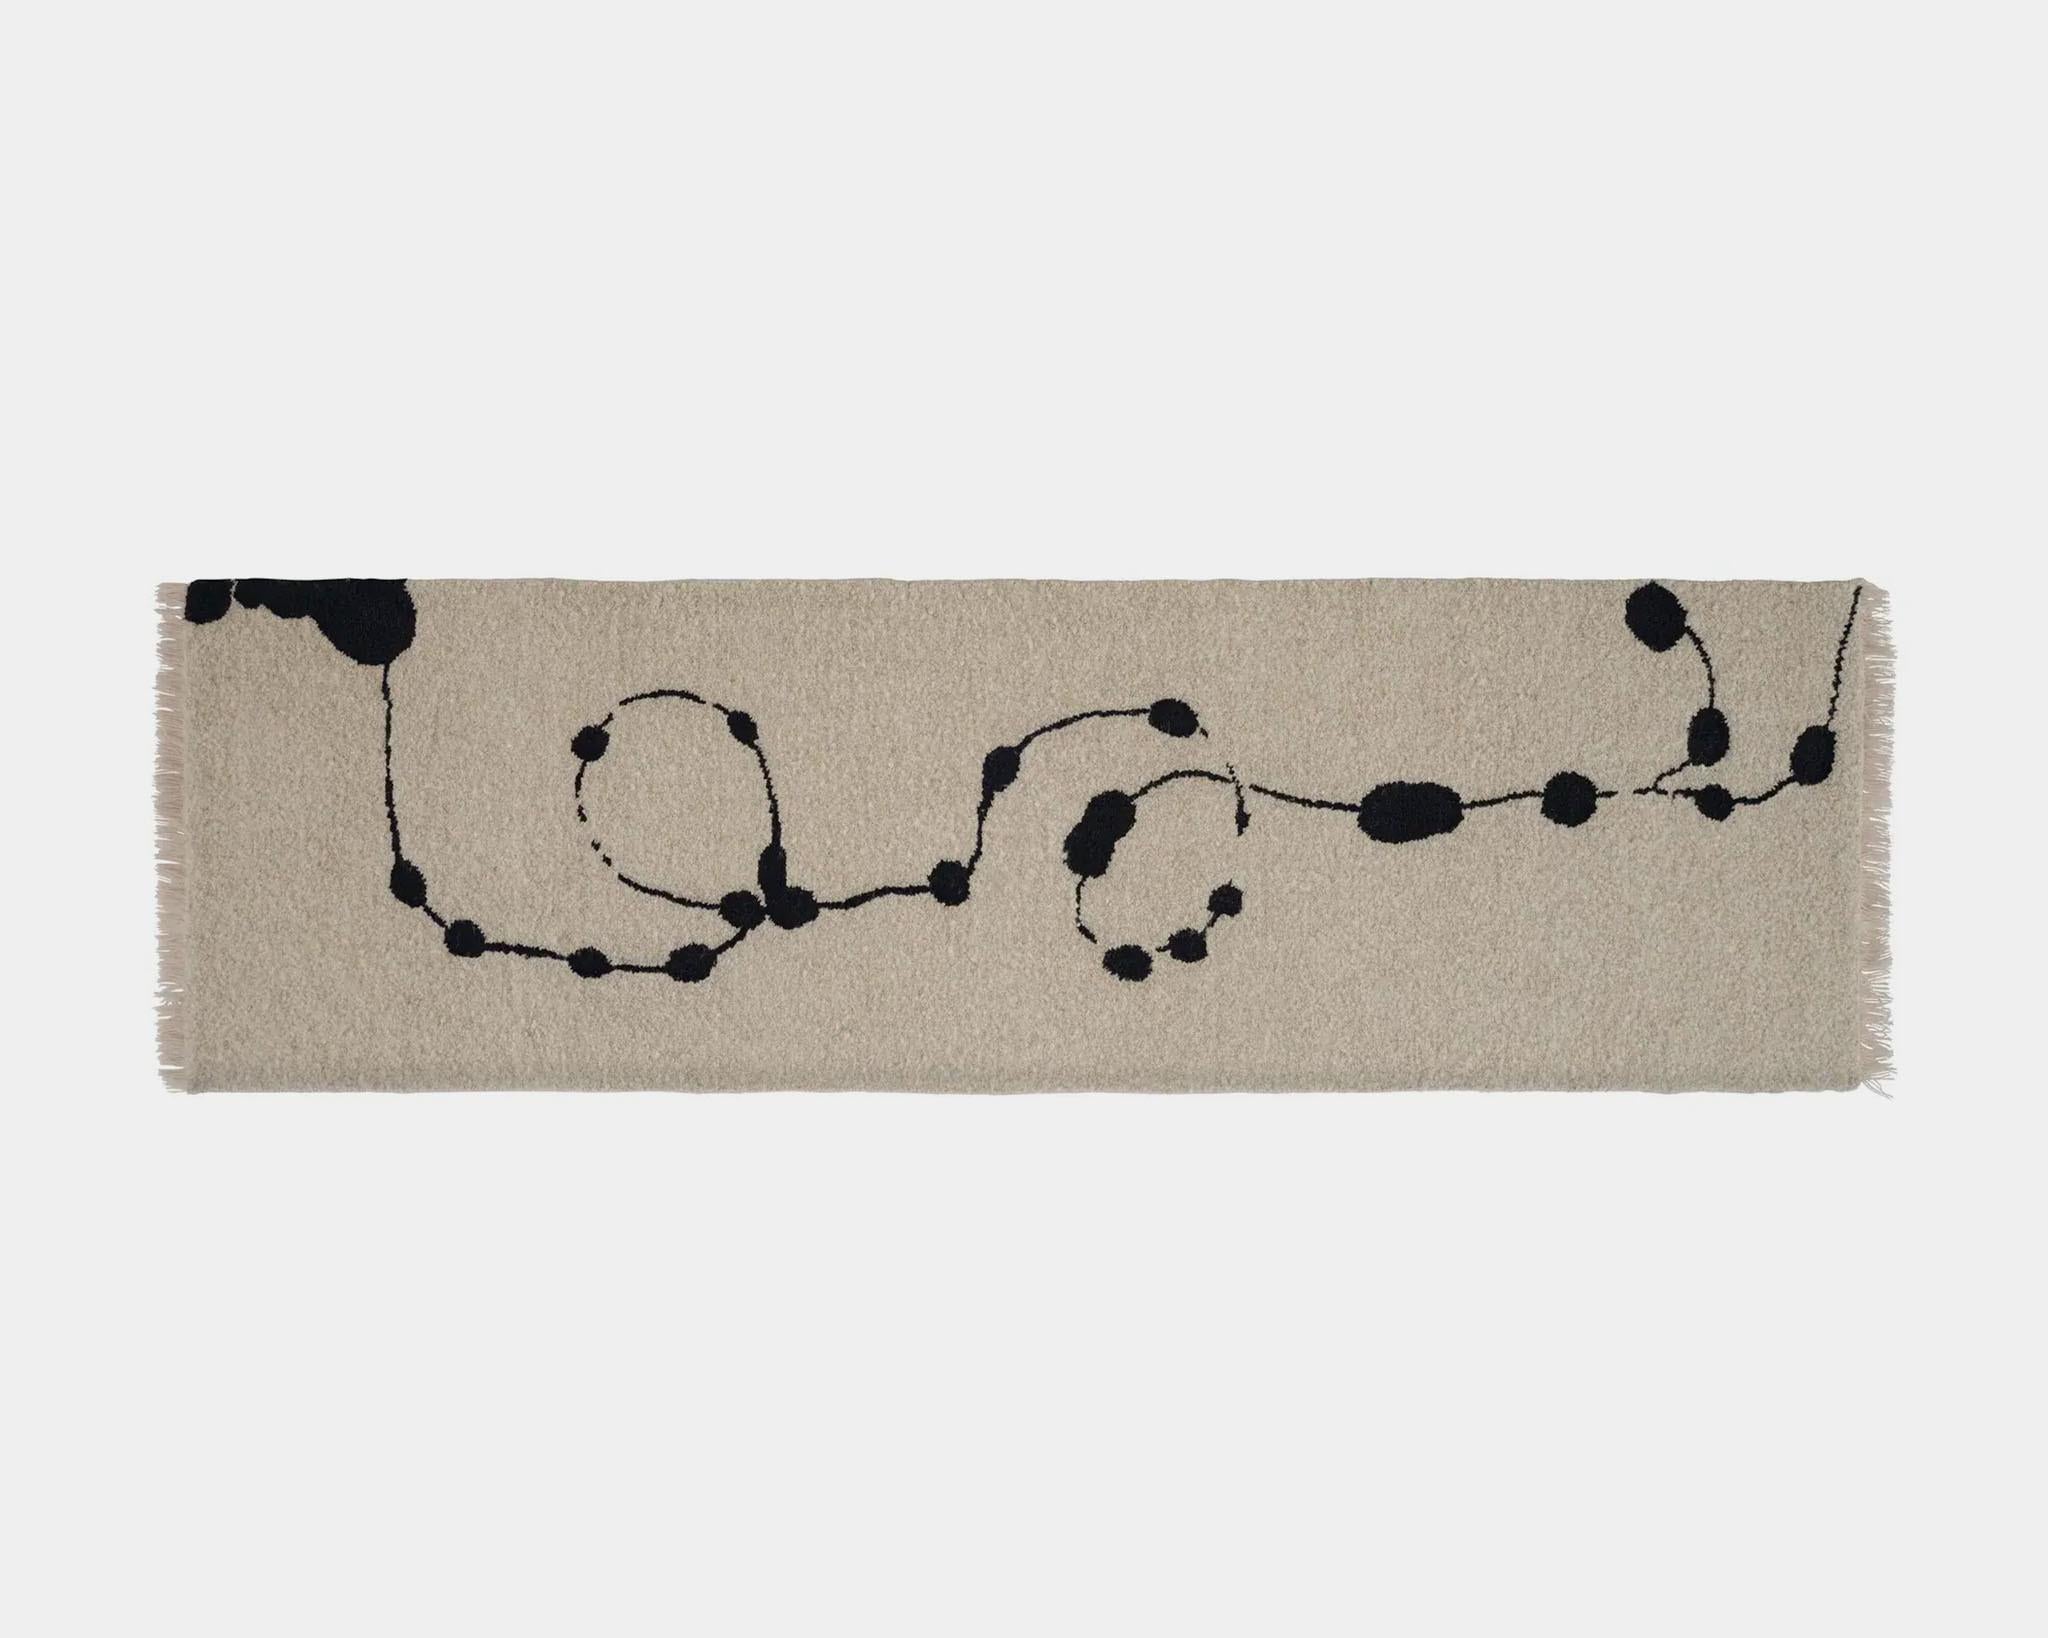 Tao Trail, 'Axiom' collection by Linie Design

Rectangular handmade rug. 
Material: Wool
Hand knotted rug  

Dimensions: 80 cm x 280 cm

An artistic and visually alluring hand-knotted rug from Linie Design. Tao Trail features an organic line that